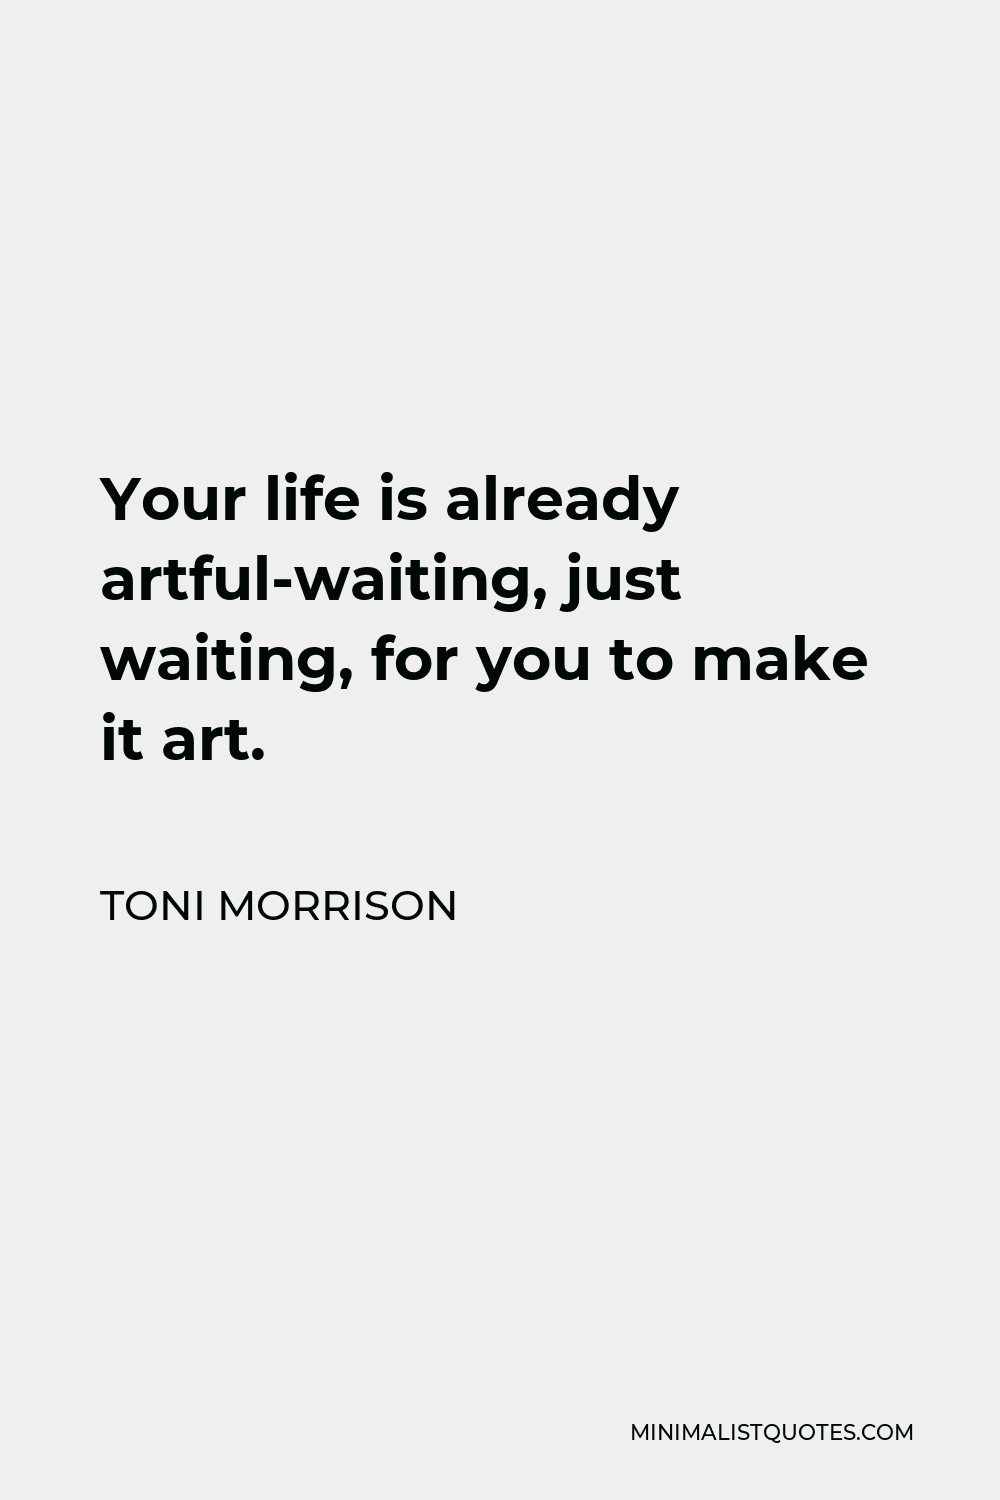 Toni Morrison Quote - Your life is already artful-waiting, just waiting, for you to make it art.